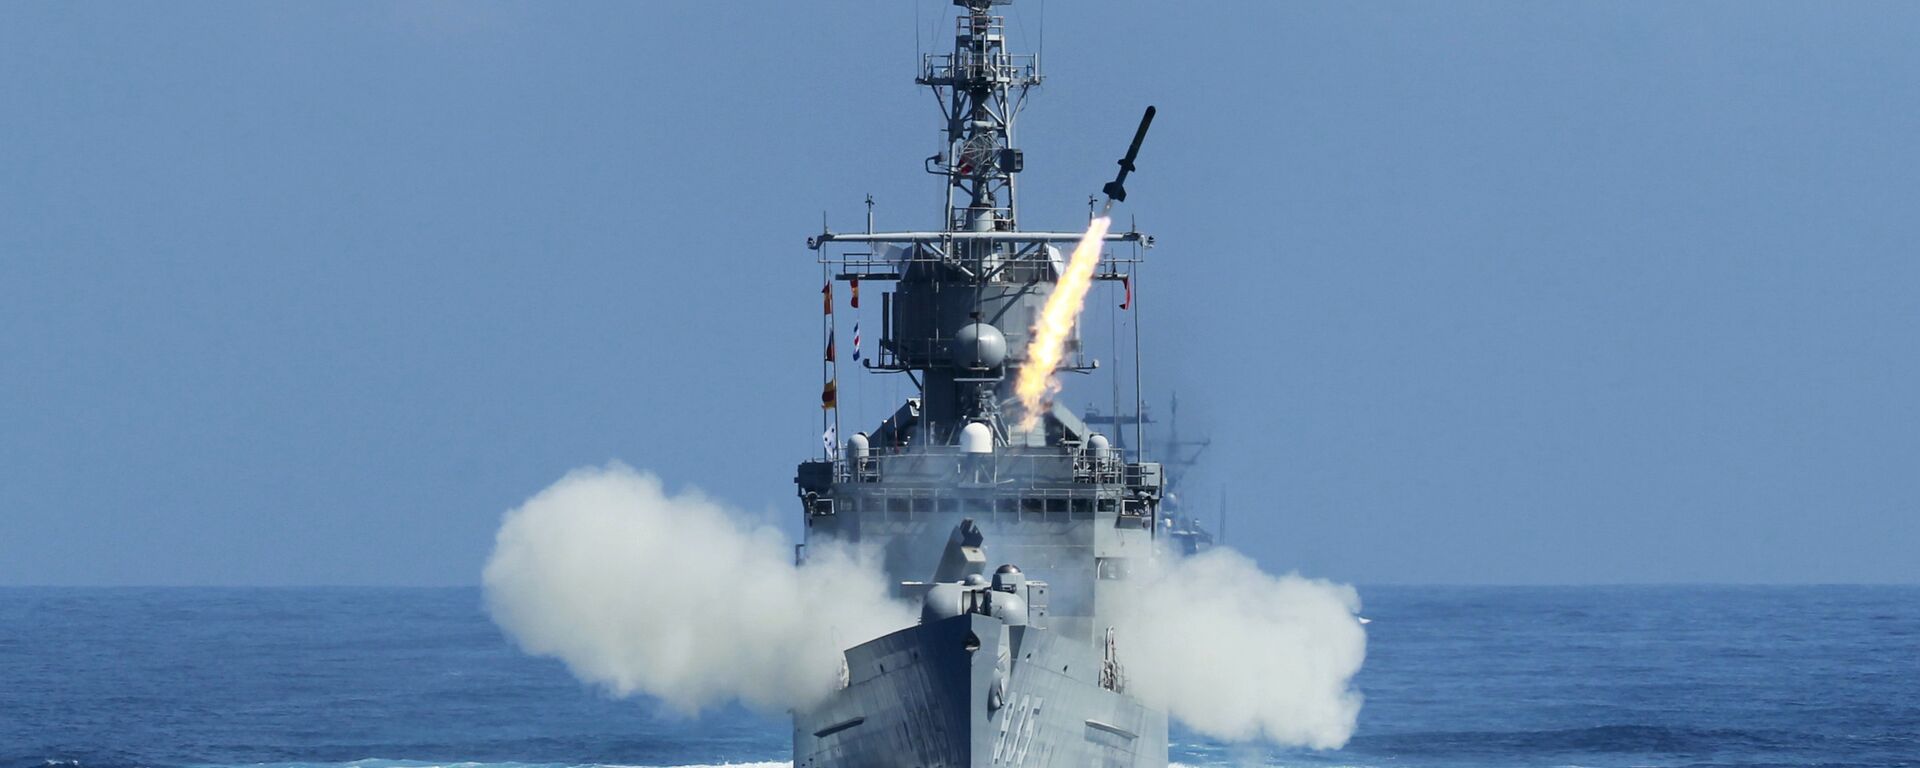 Taiwan Navy's Perry-class frigate launches an ASROC (anti-submarine rocket) during the annual Han Kuang military exercises. - Sputnik International, 1920, 22.08.2023